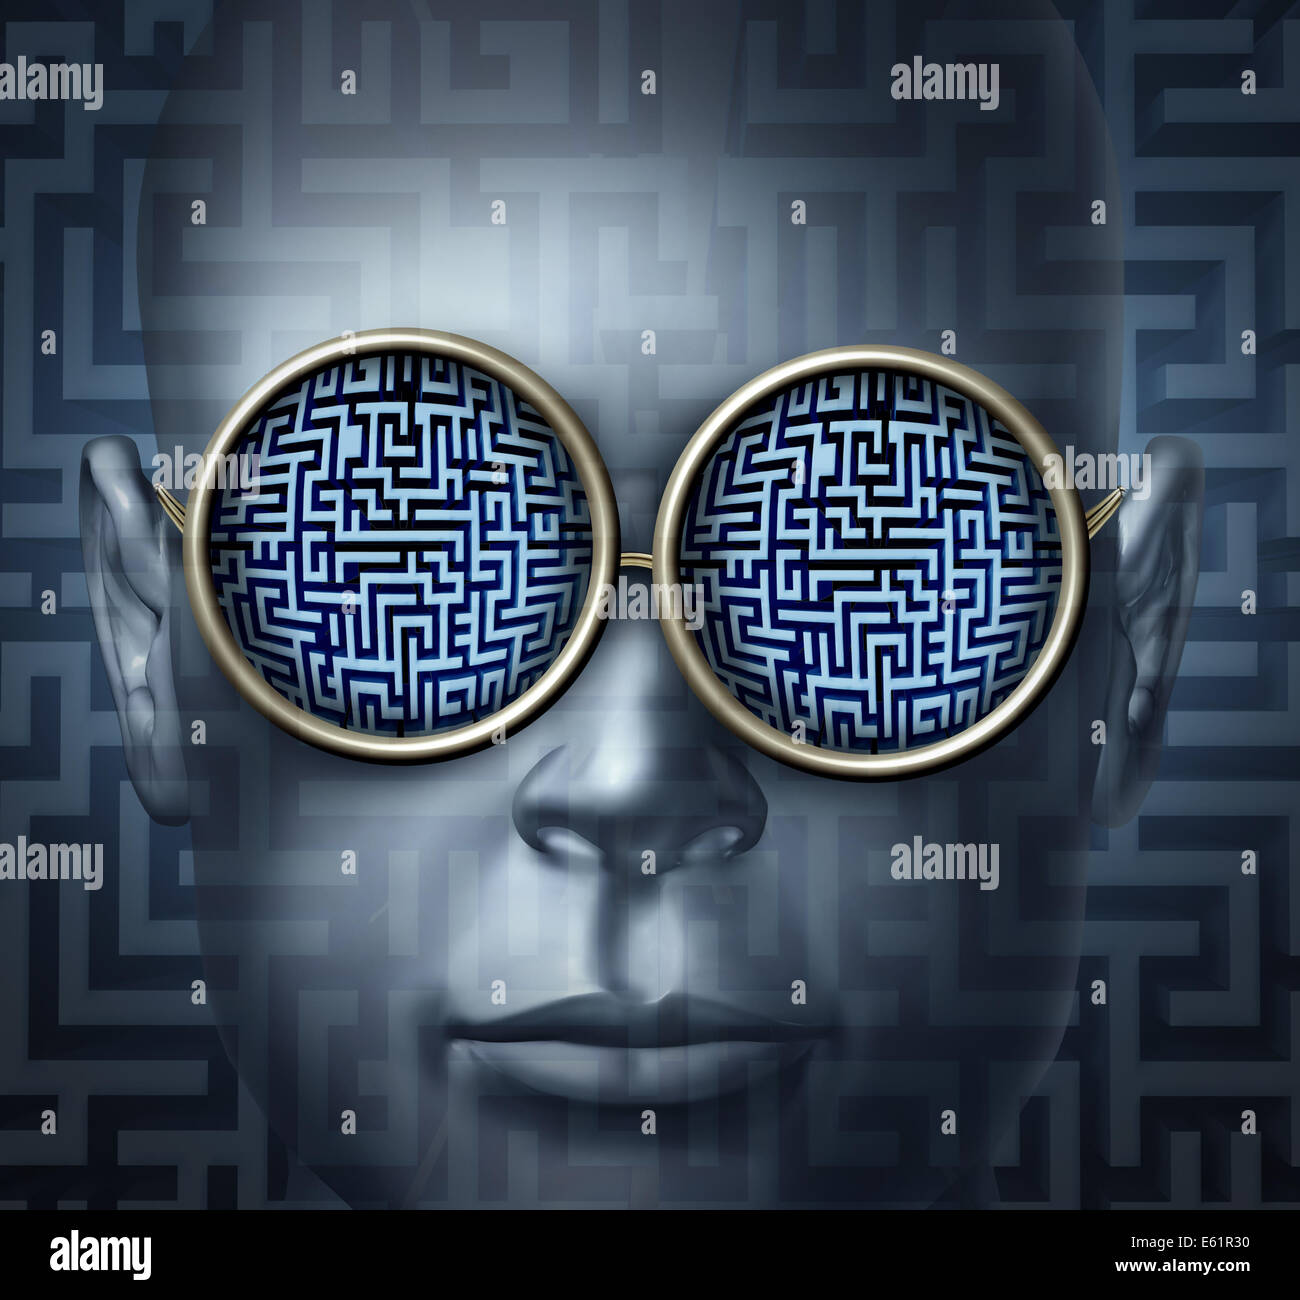 Global solutions business concept as a human head wearing glasses with a maze or labyrinth as a symbol for guidance visionary and strategic direction challenge. Stock Photo